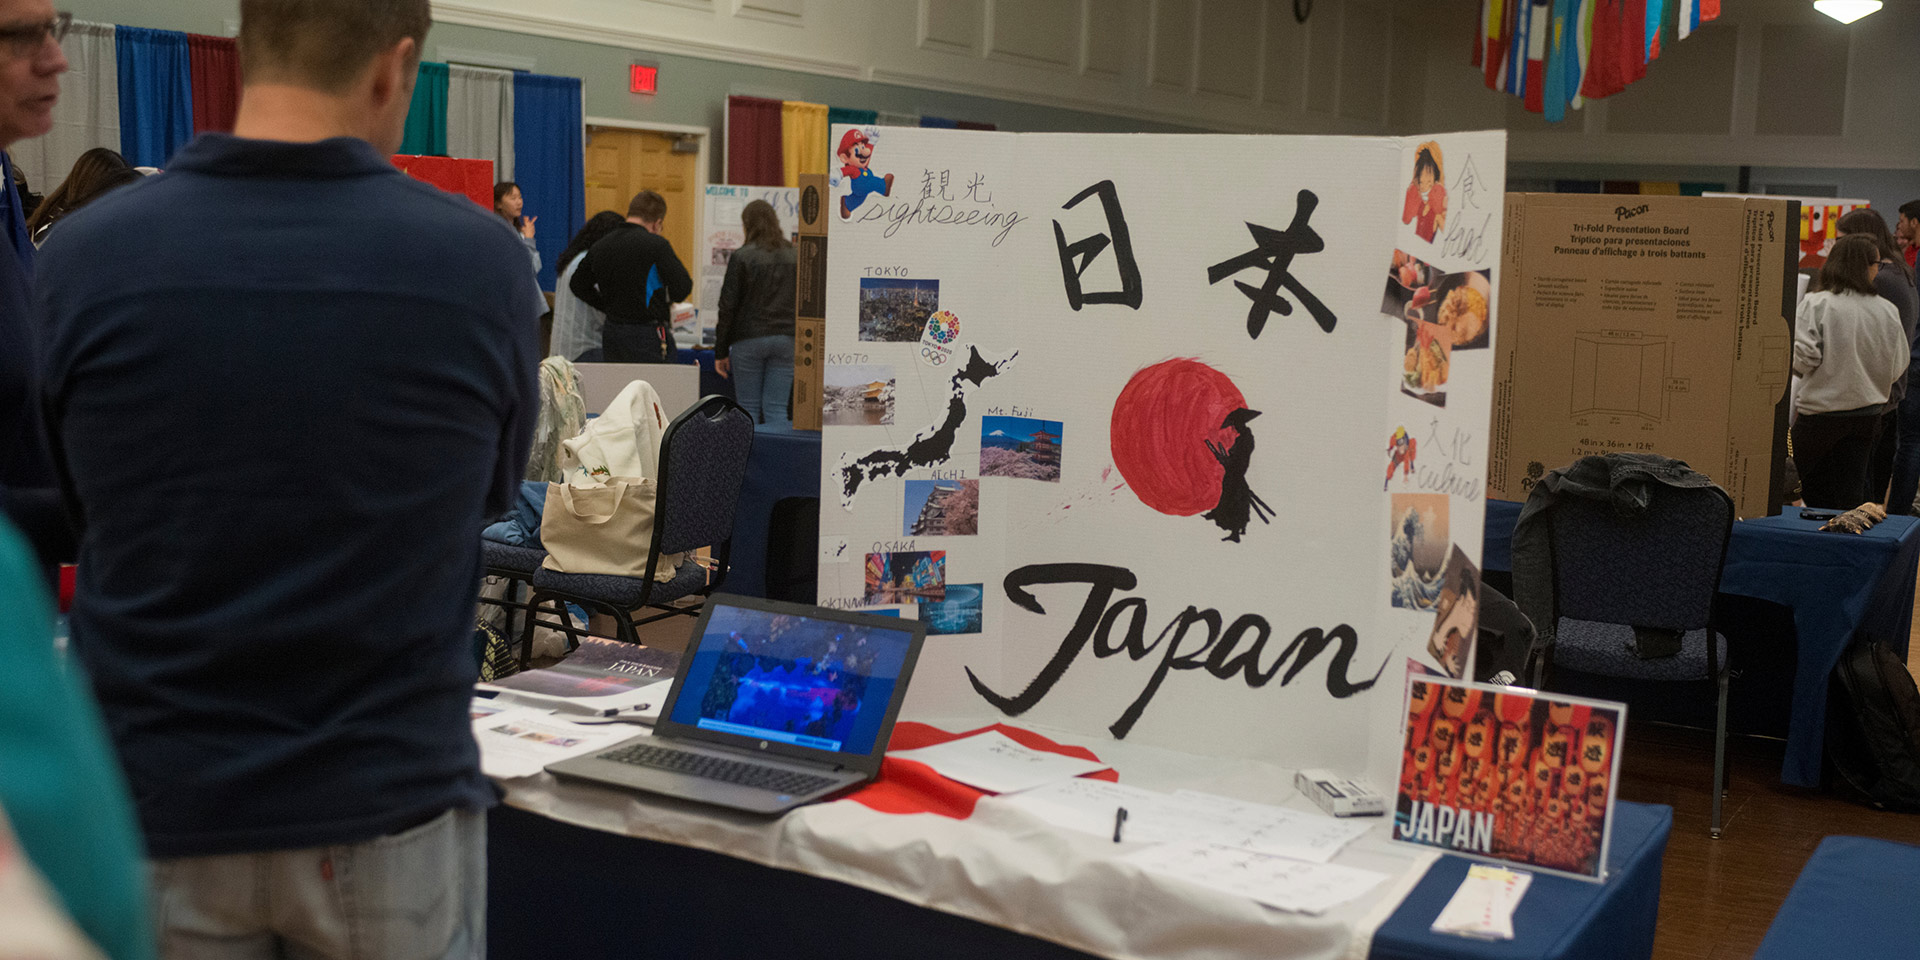 A photo of a posterboard that details information about Japan during UNCW’s annual iFest